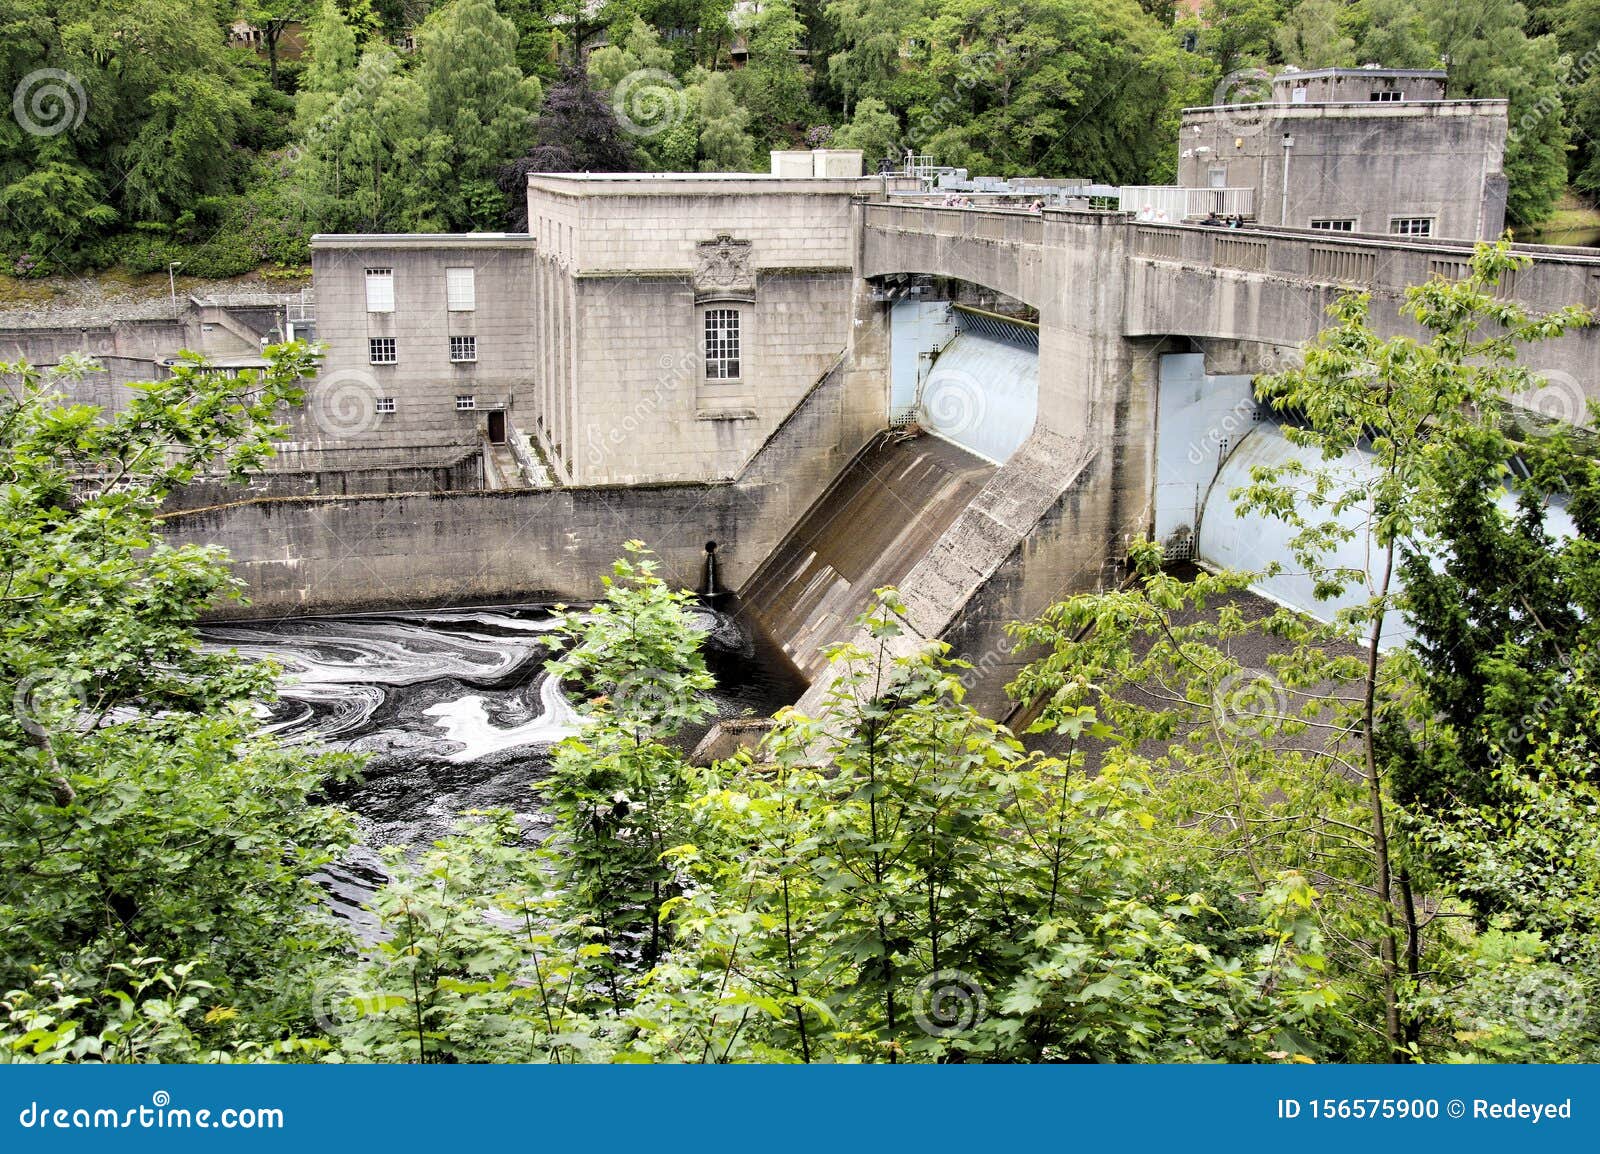 pitlochry dam, hydro power station and fish ladder